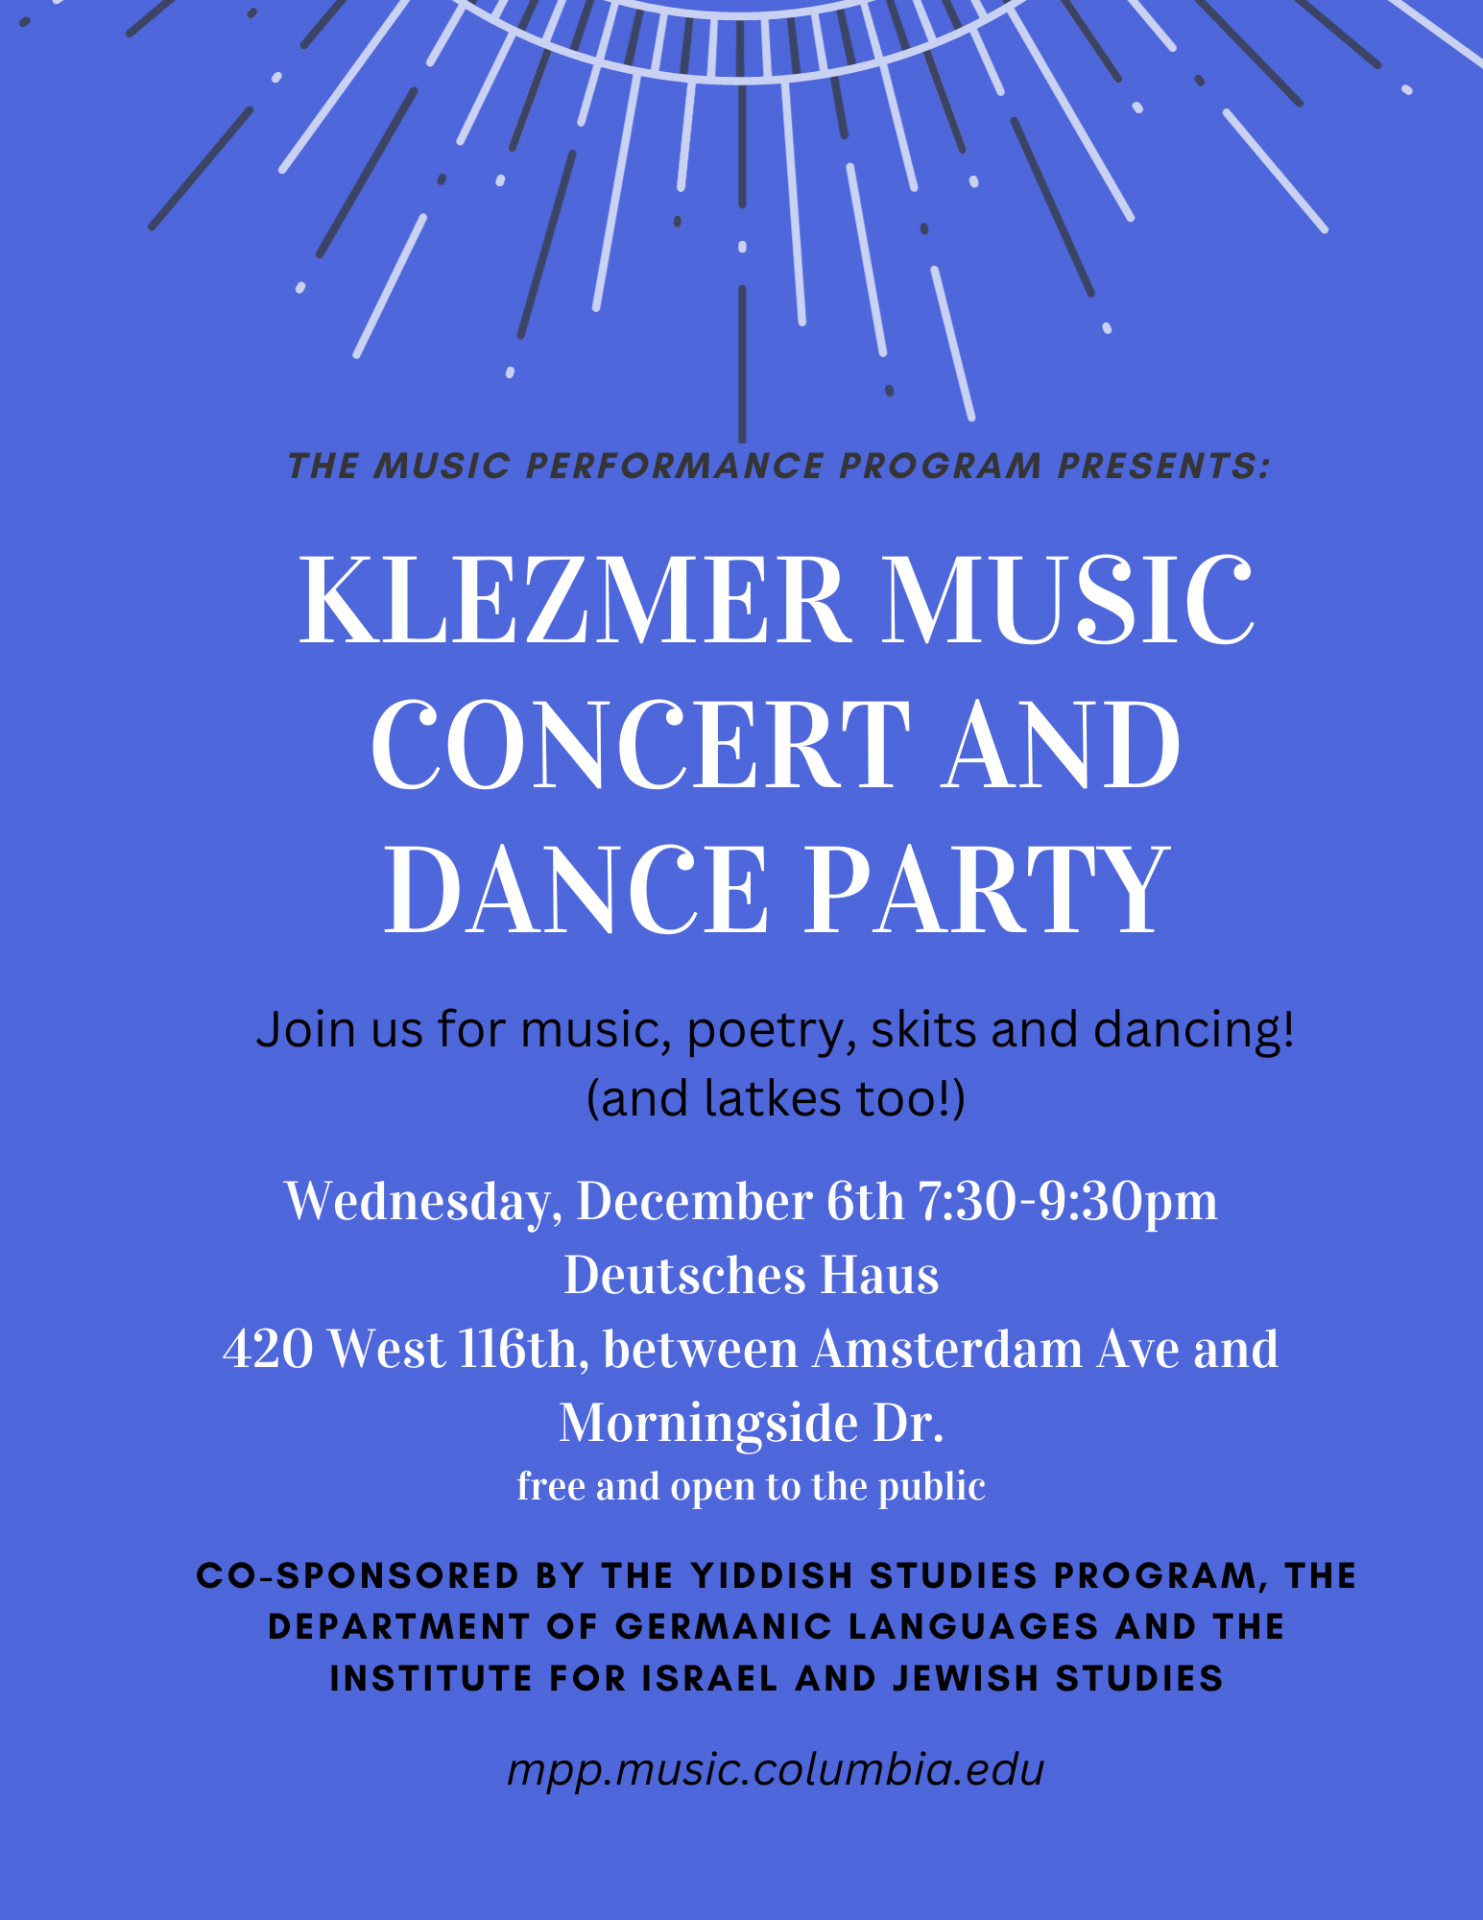 "Join us for music, poetry, skits, and dancing!" Klezmer Music Concert and Dance Party on Wednesday, 12/6 from 7:30pm-9:30pm at Deutches Haus 420 West 116th between Amsterdam Ave and Morningside Drive. Free and open to the public. 